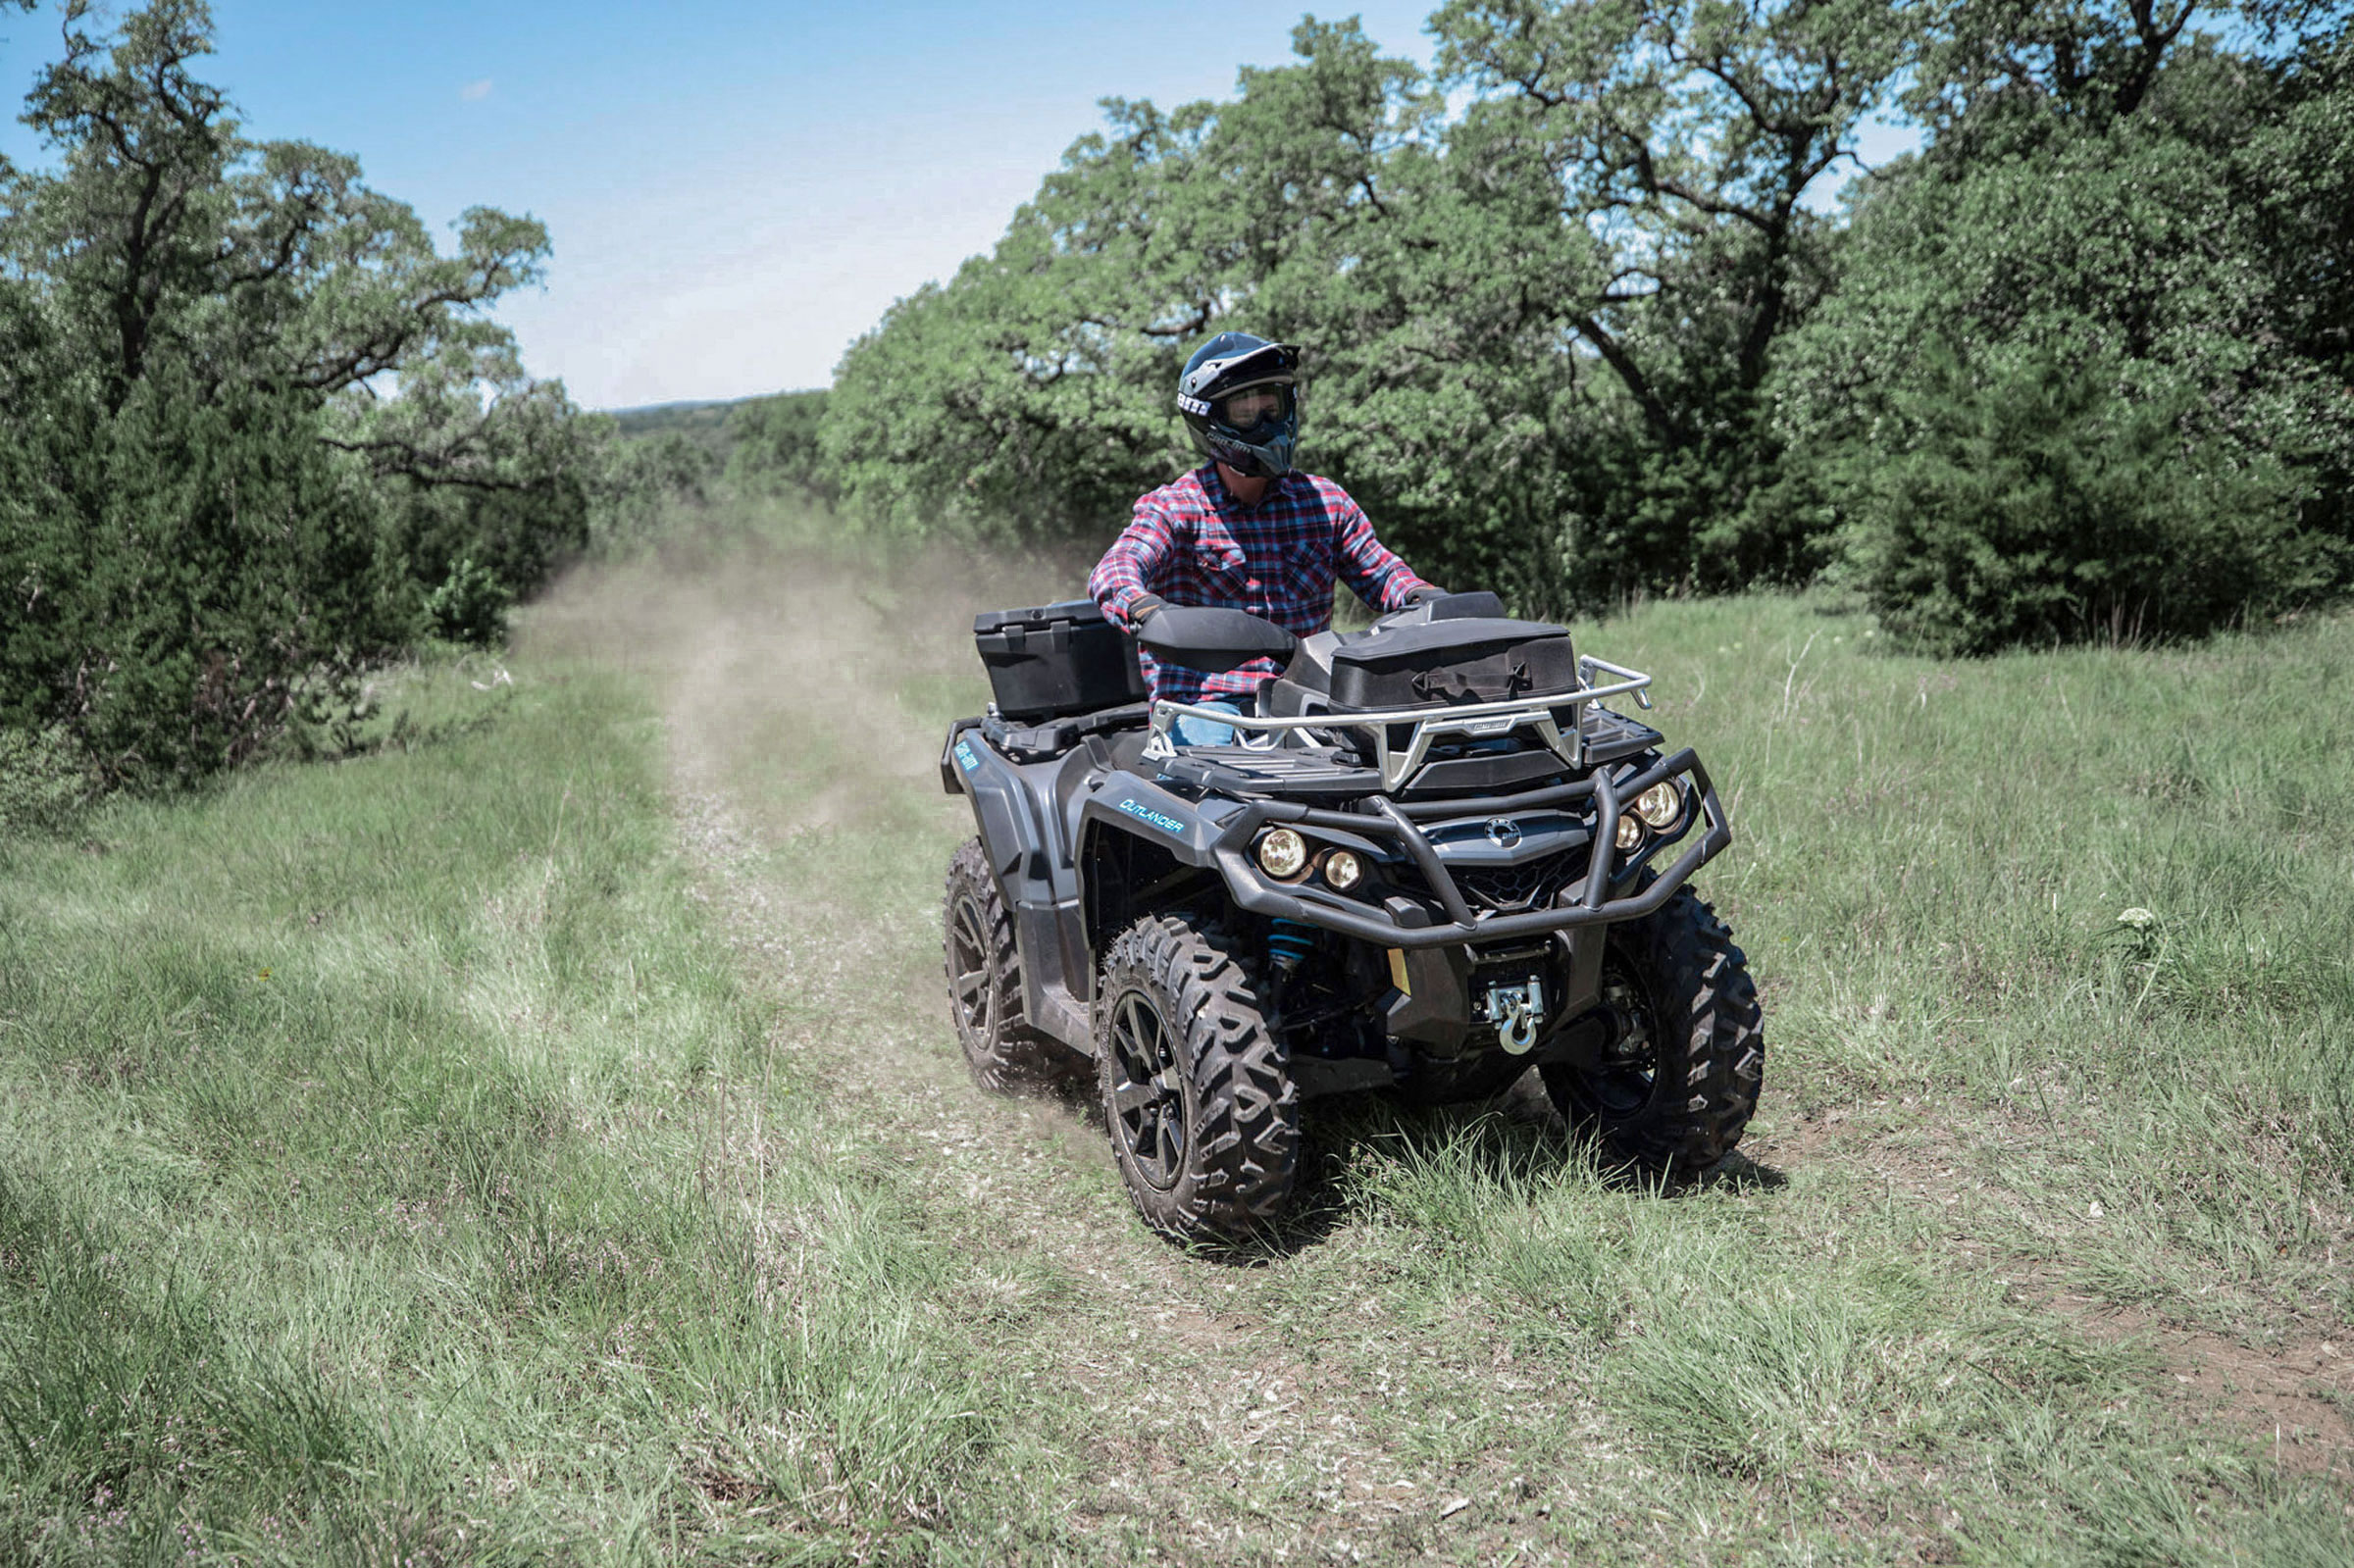 A rider on a new Can Am Outlander ATV, riding on a grassy trail lined with lush green trees under a bright blue sky